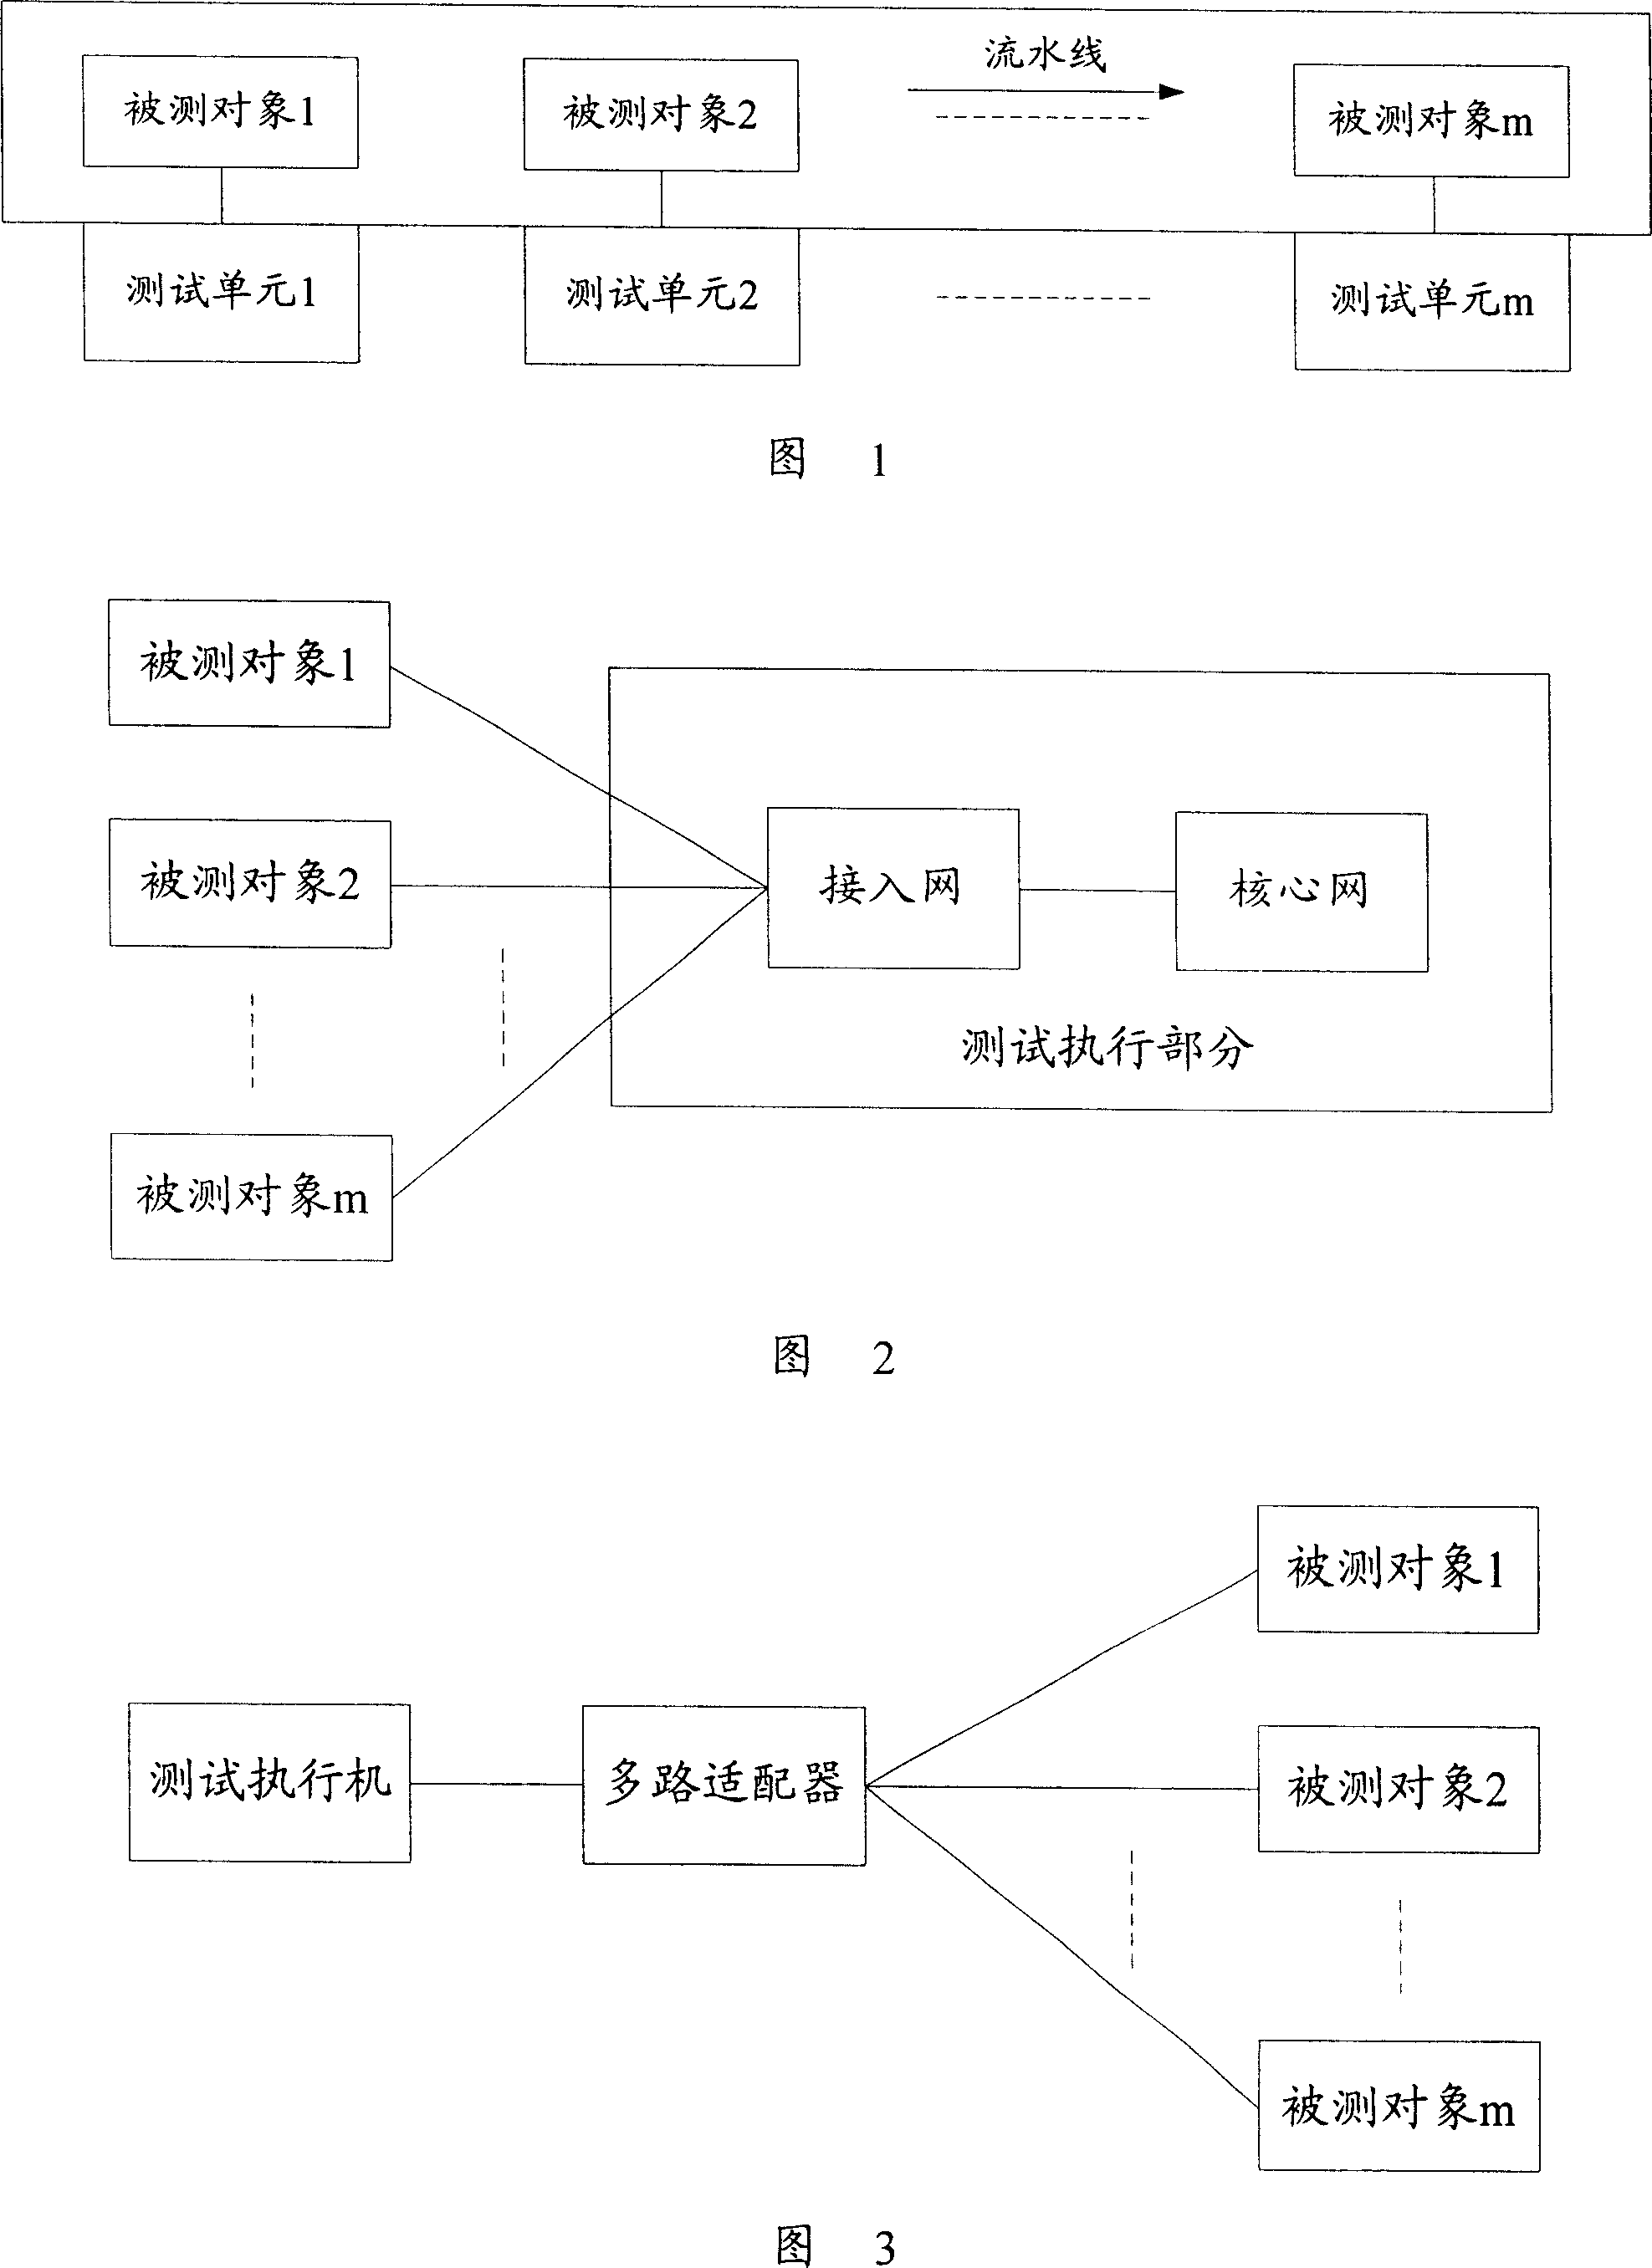 Parallel testing method and system